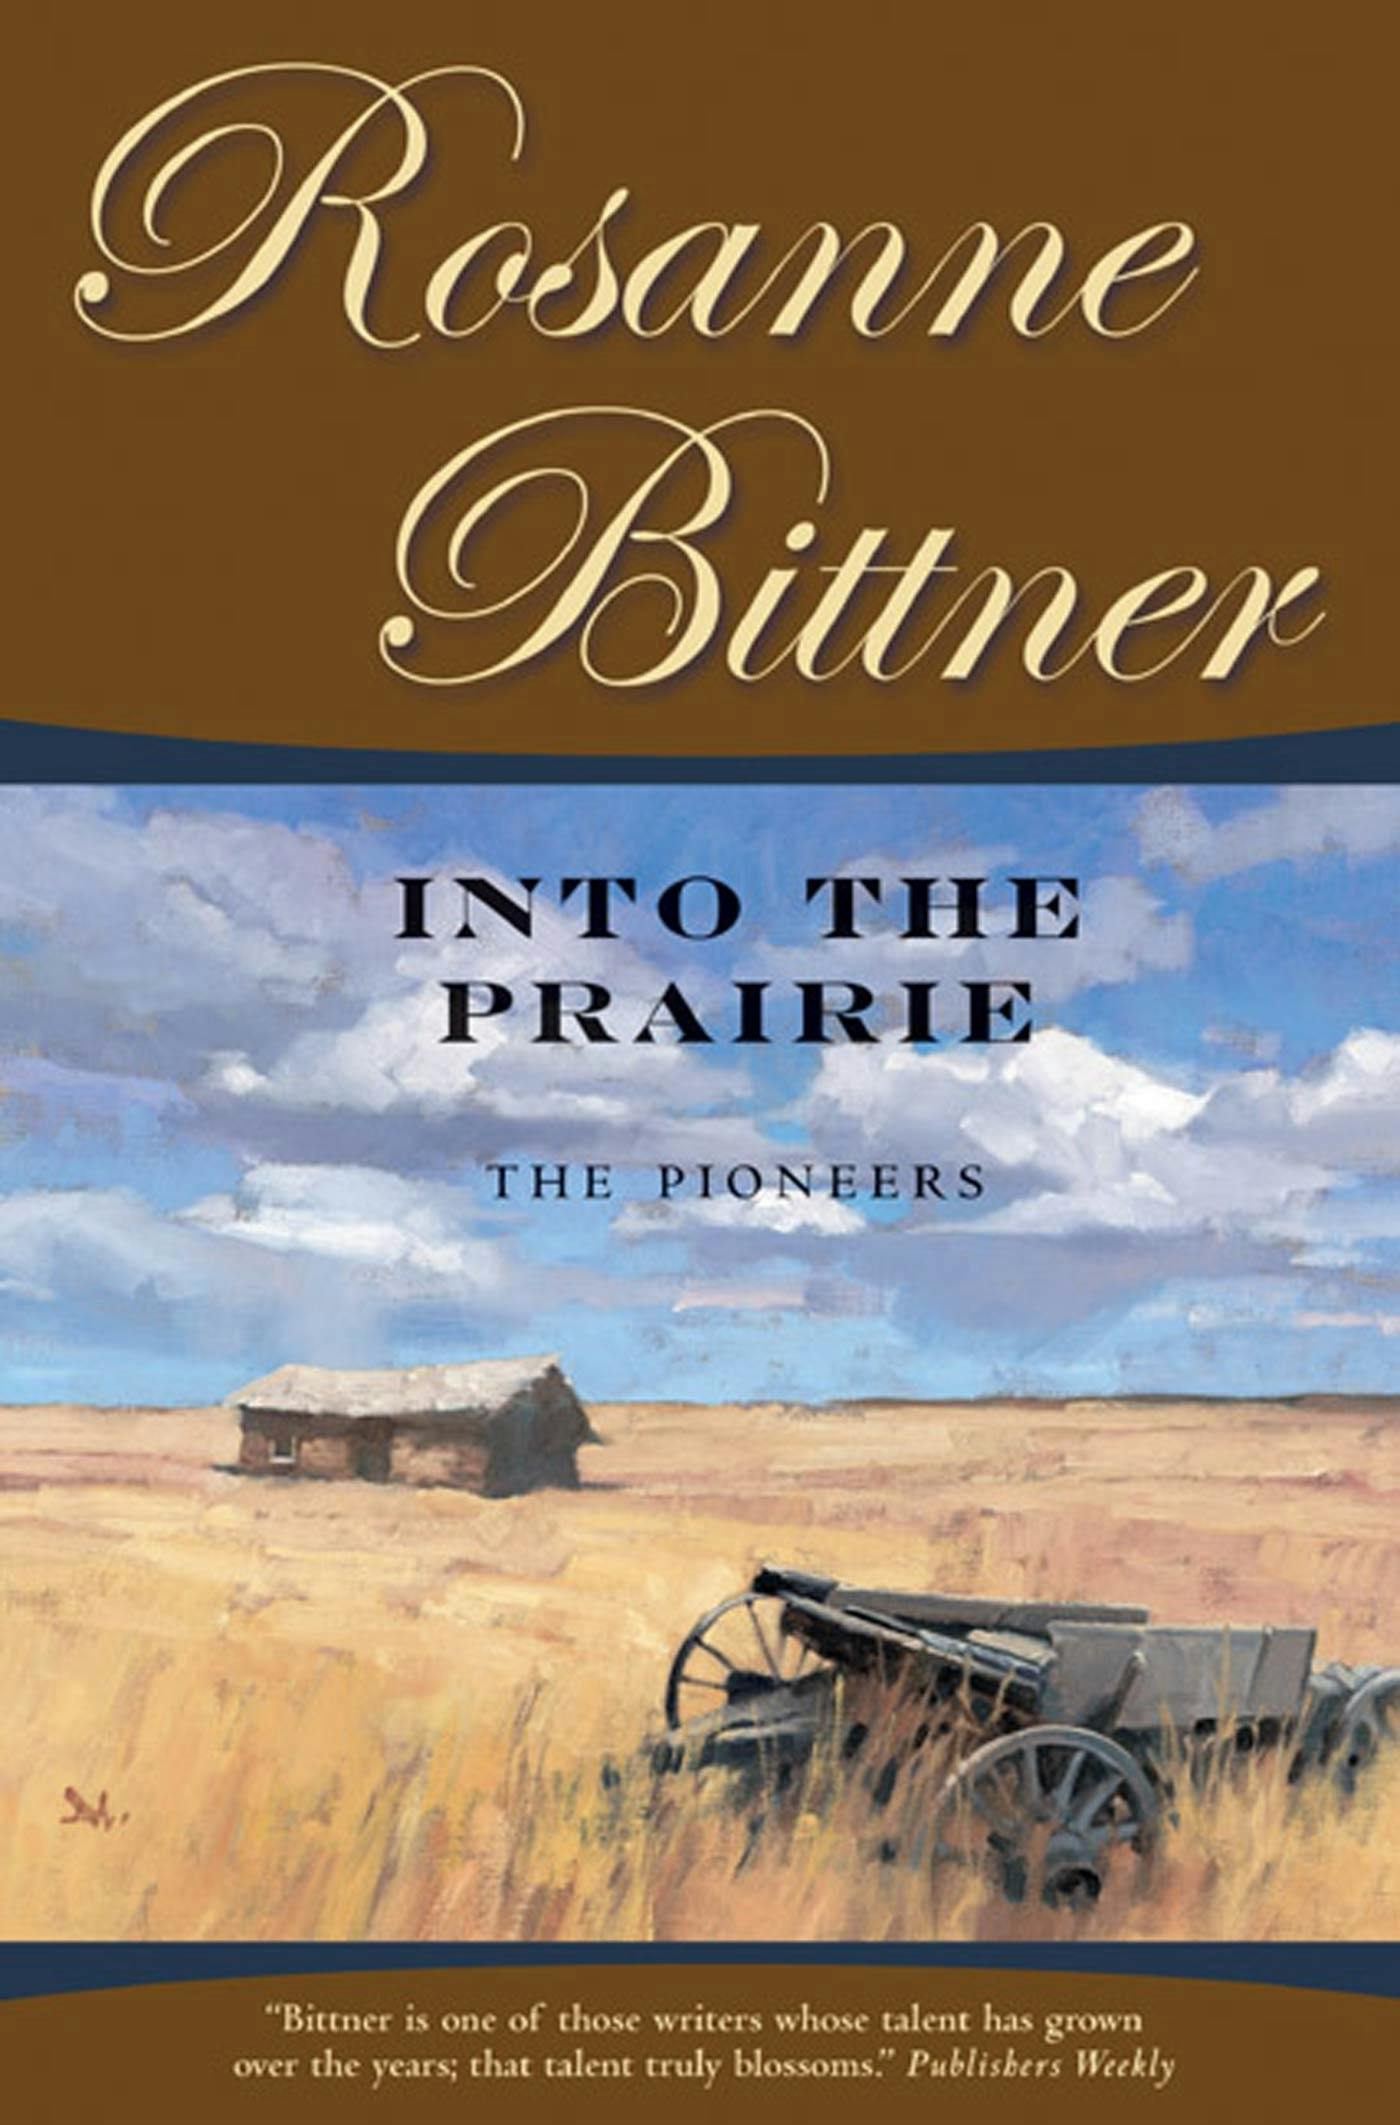 Cover for the book titled as: Into the Prairie